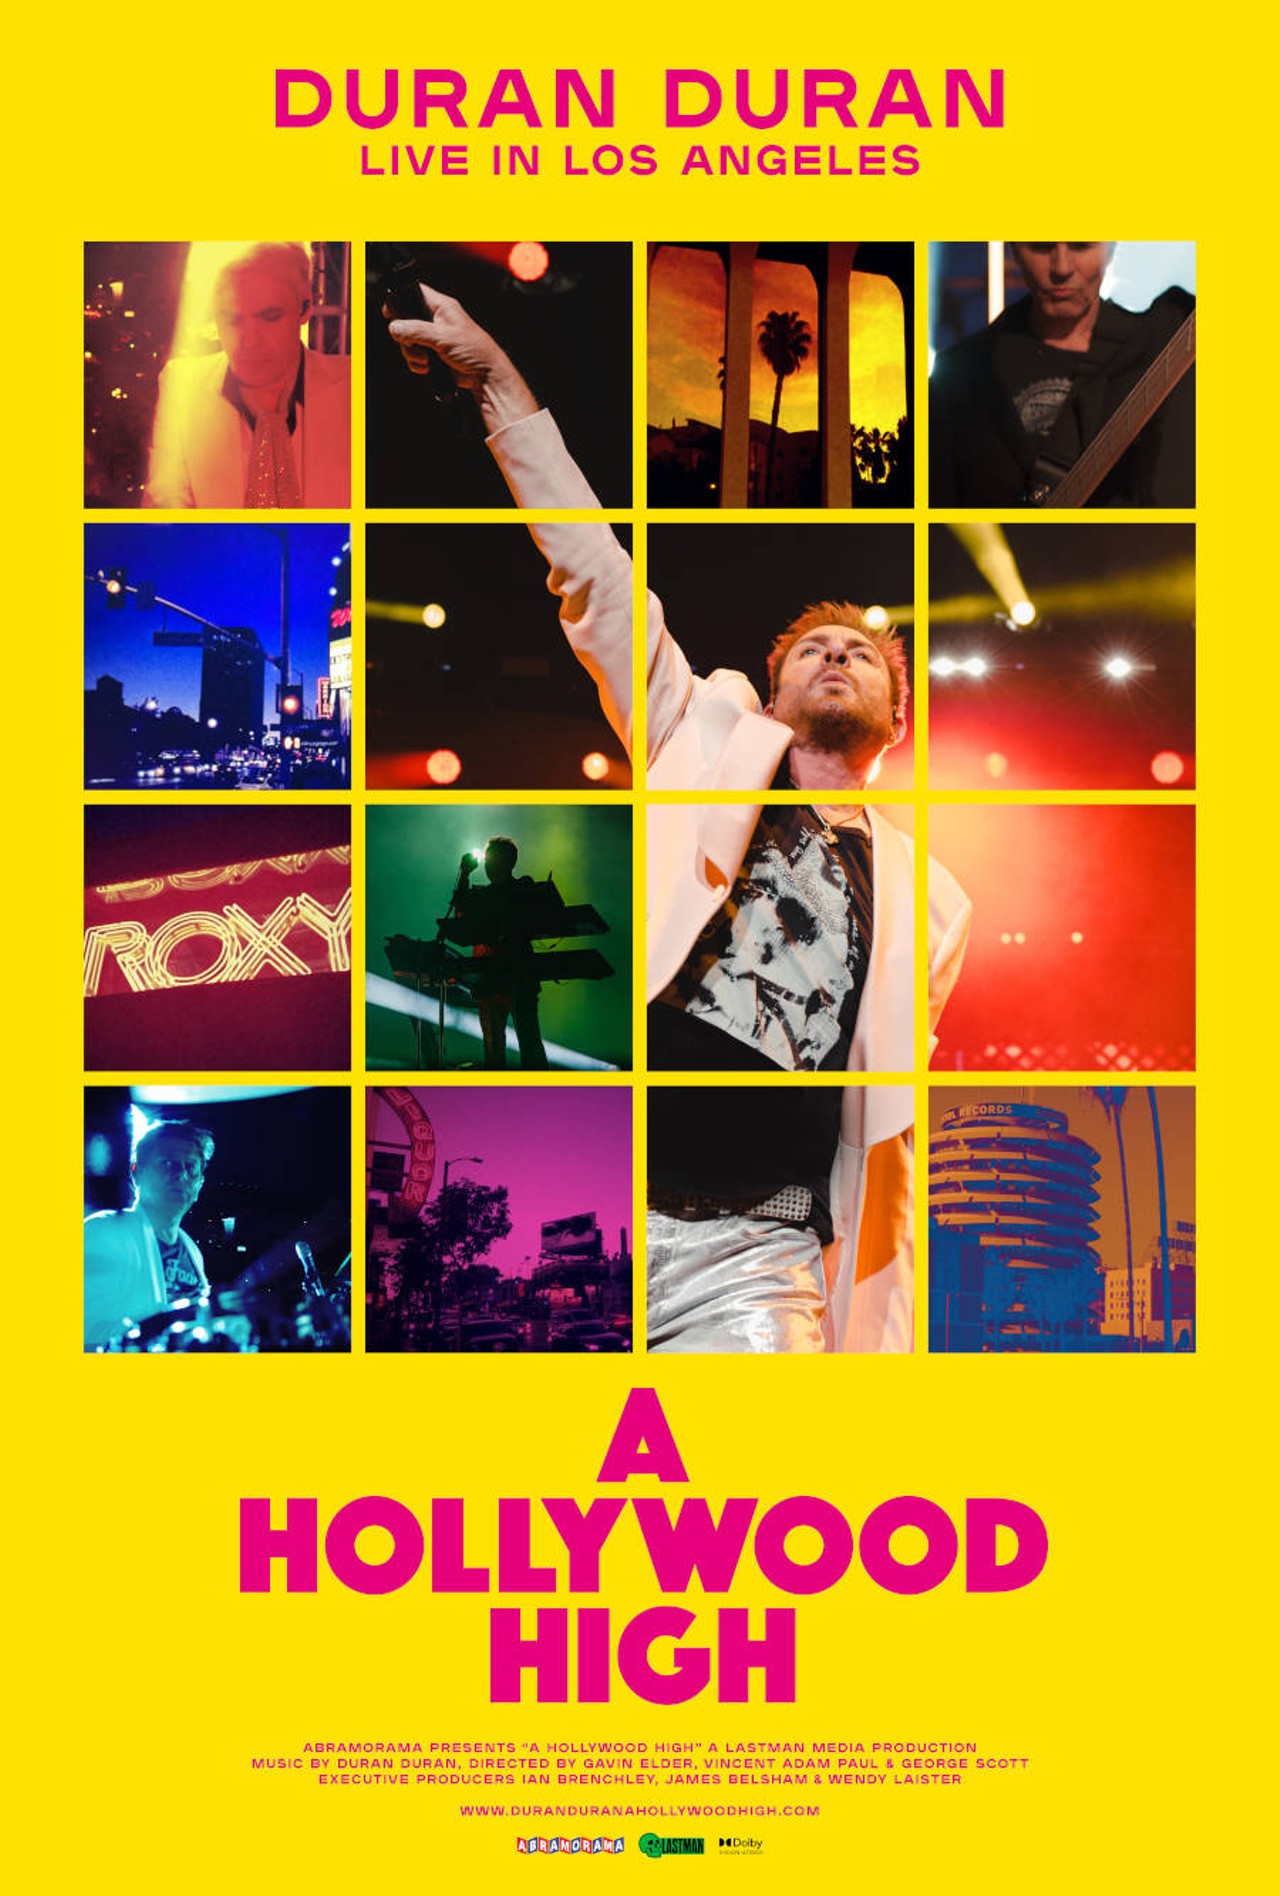 A Hollywood High Duran Duran Live in Concert Houston Press The